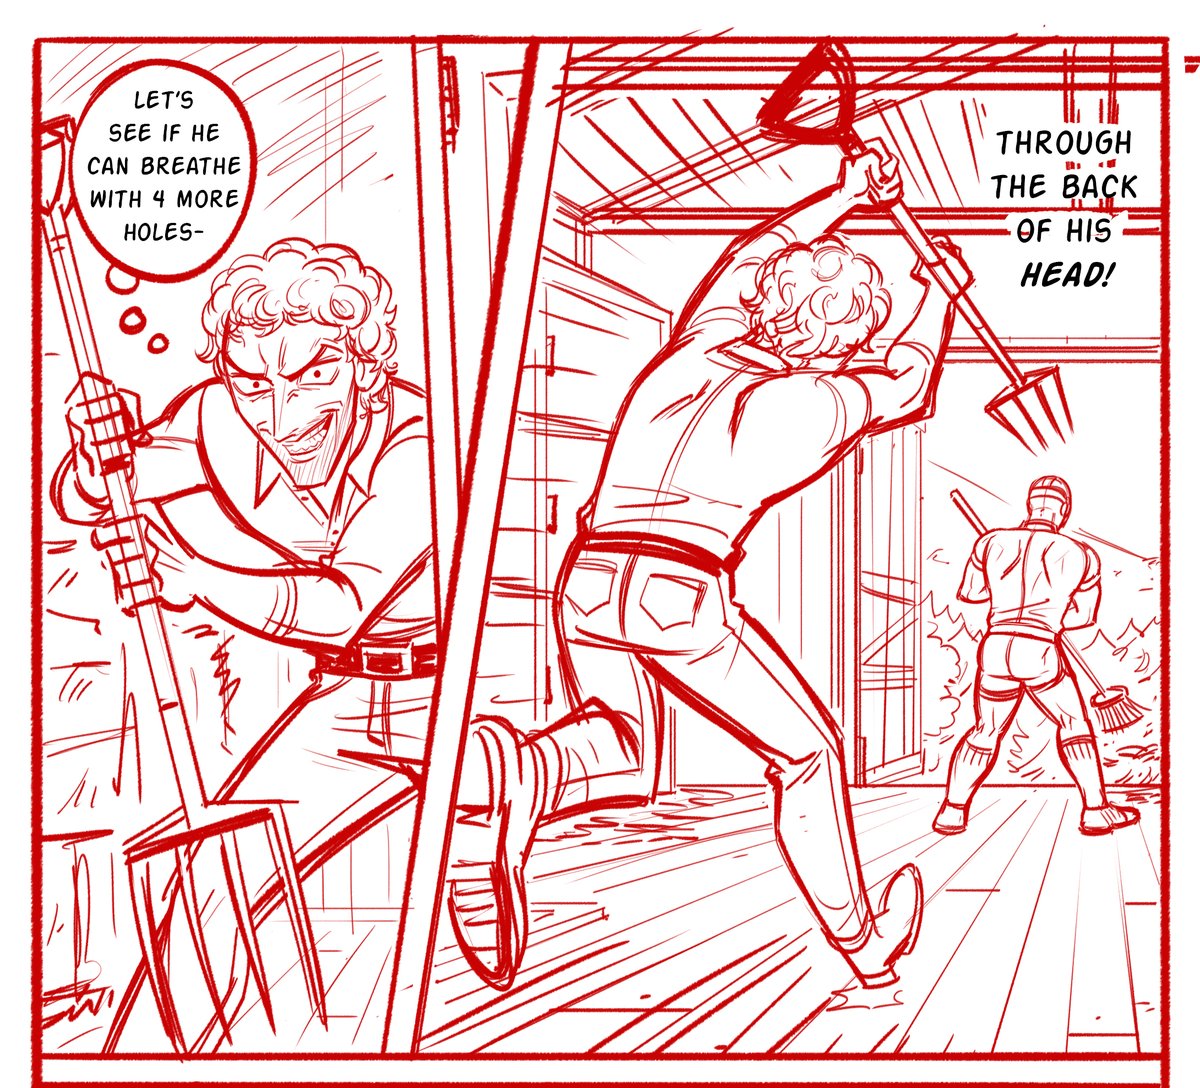 A small preview for the next comics (3 parts) of Camp Counselor Jason Vs. the killers from Wes Craven's "Last House on the Left". ? Can't wait for you guys to see it~! ???‍? 